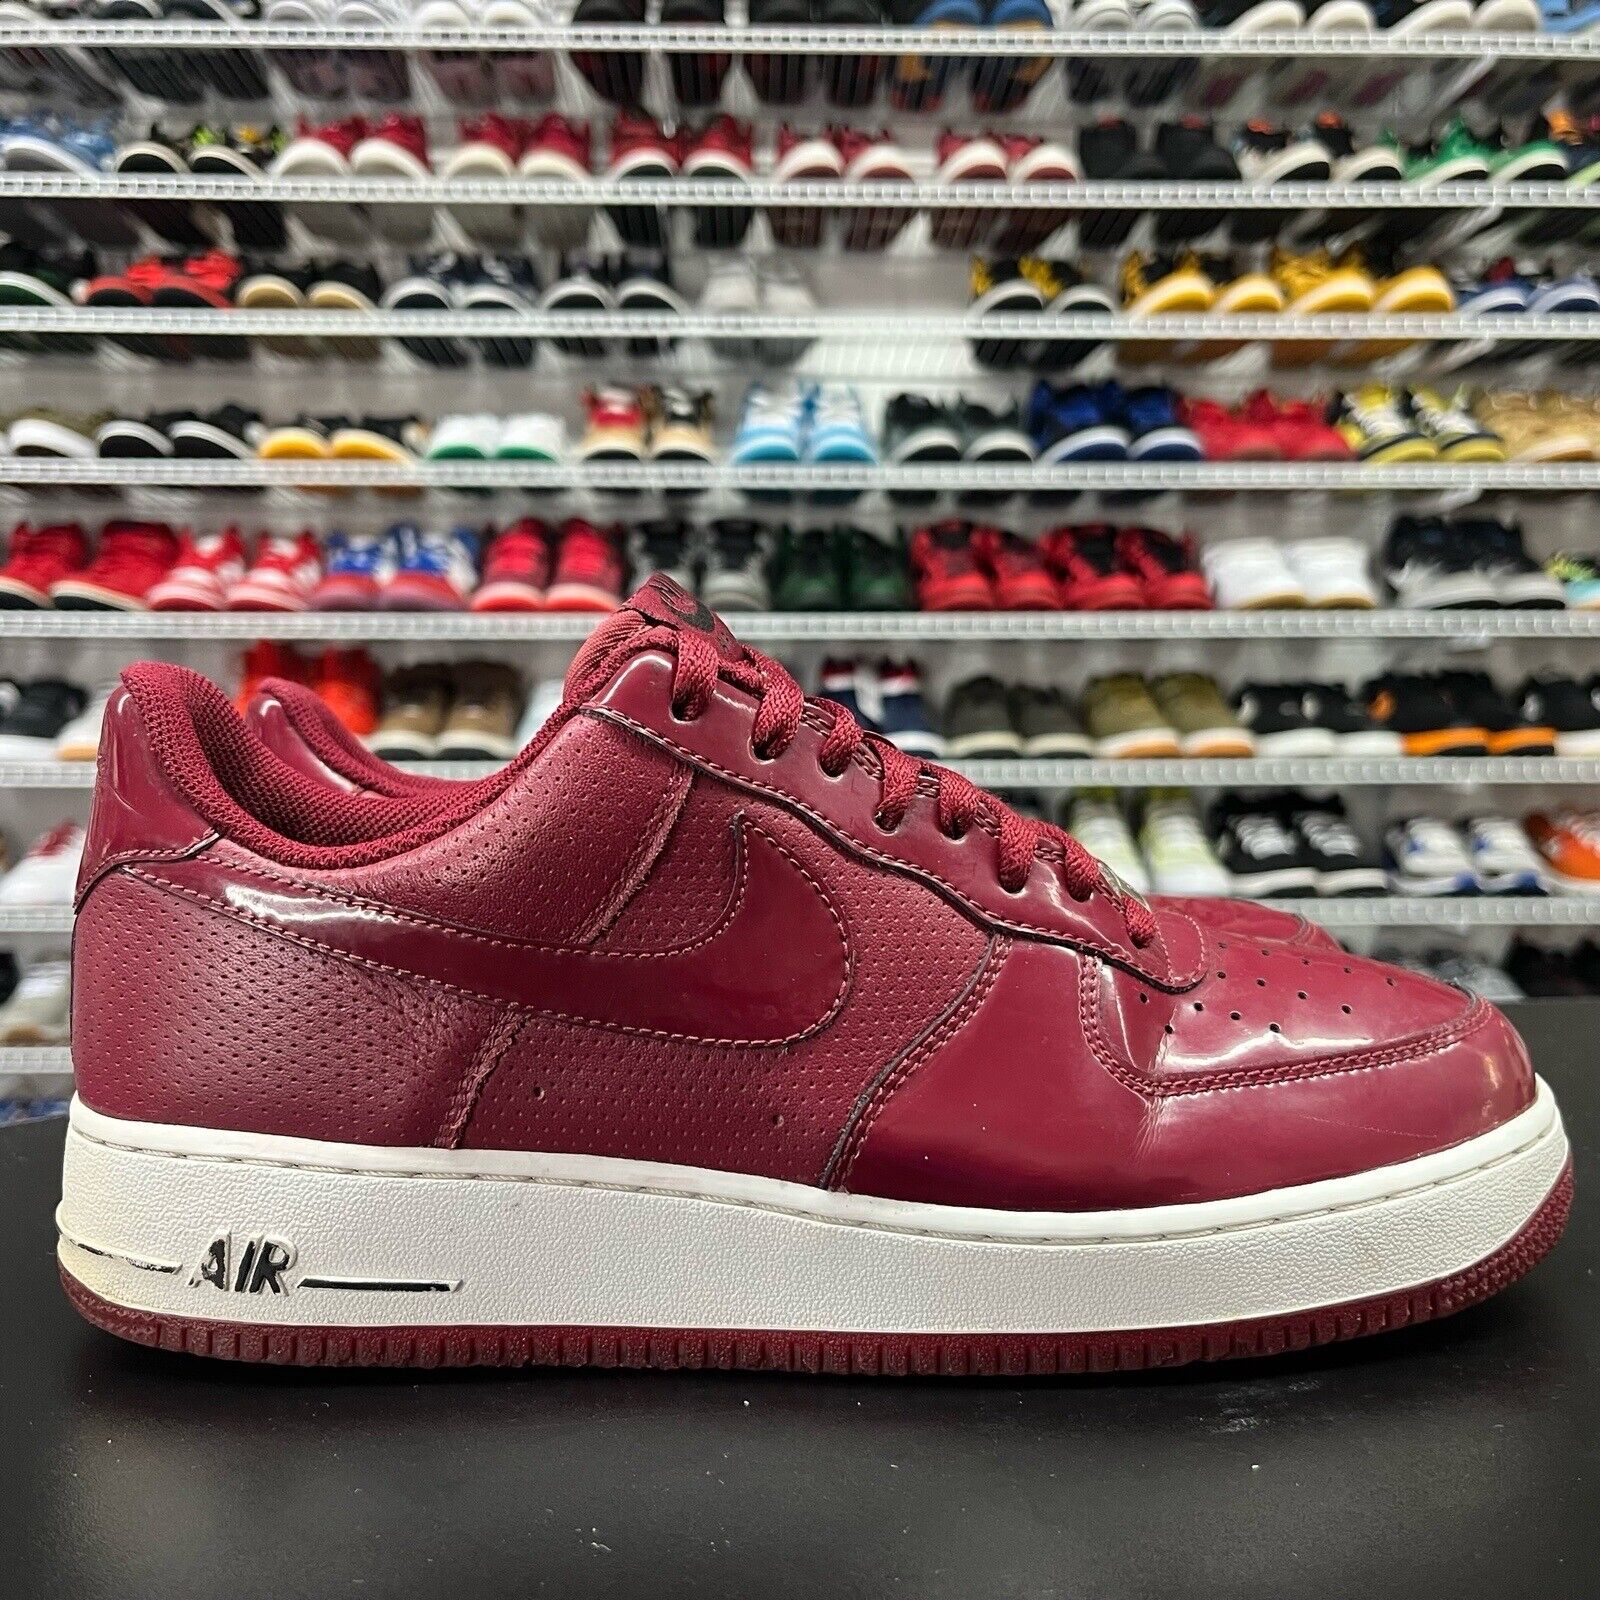 Nike Air Force 1 Crimson Red Patent Leather Sneakers 315122-601 